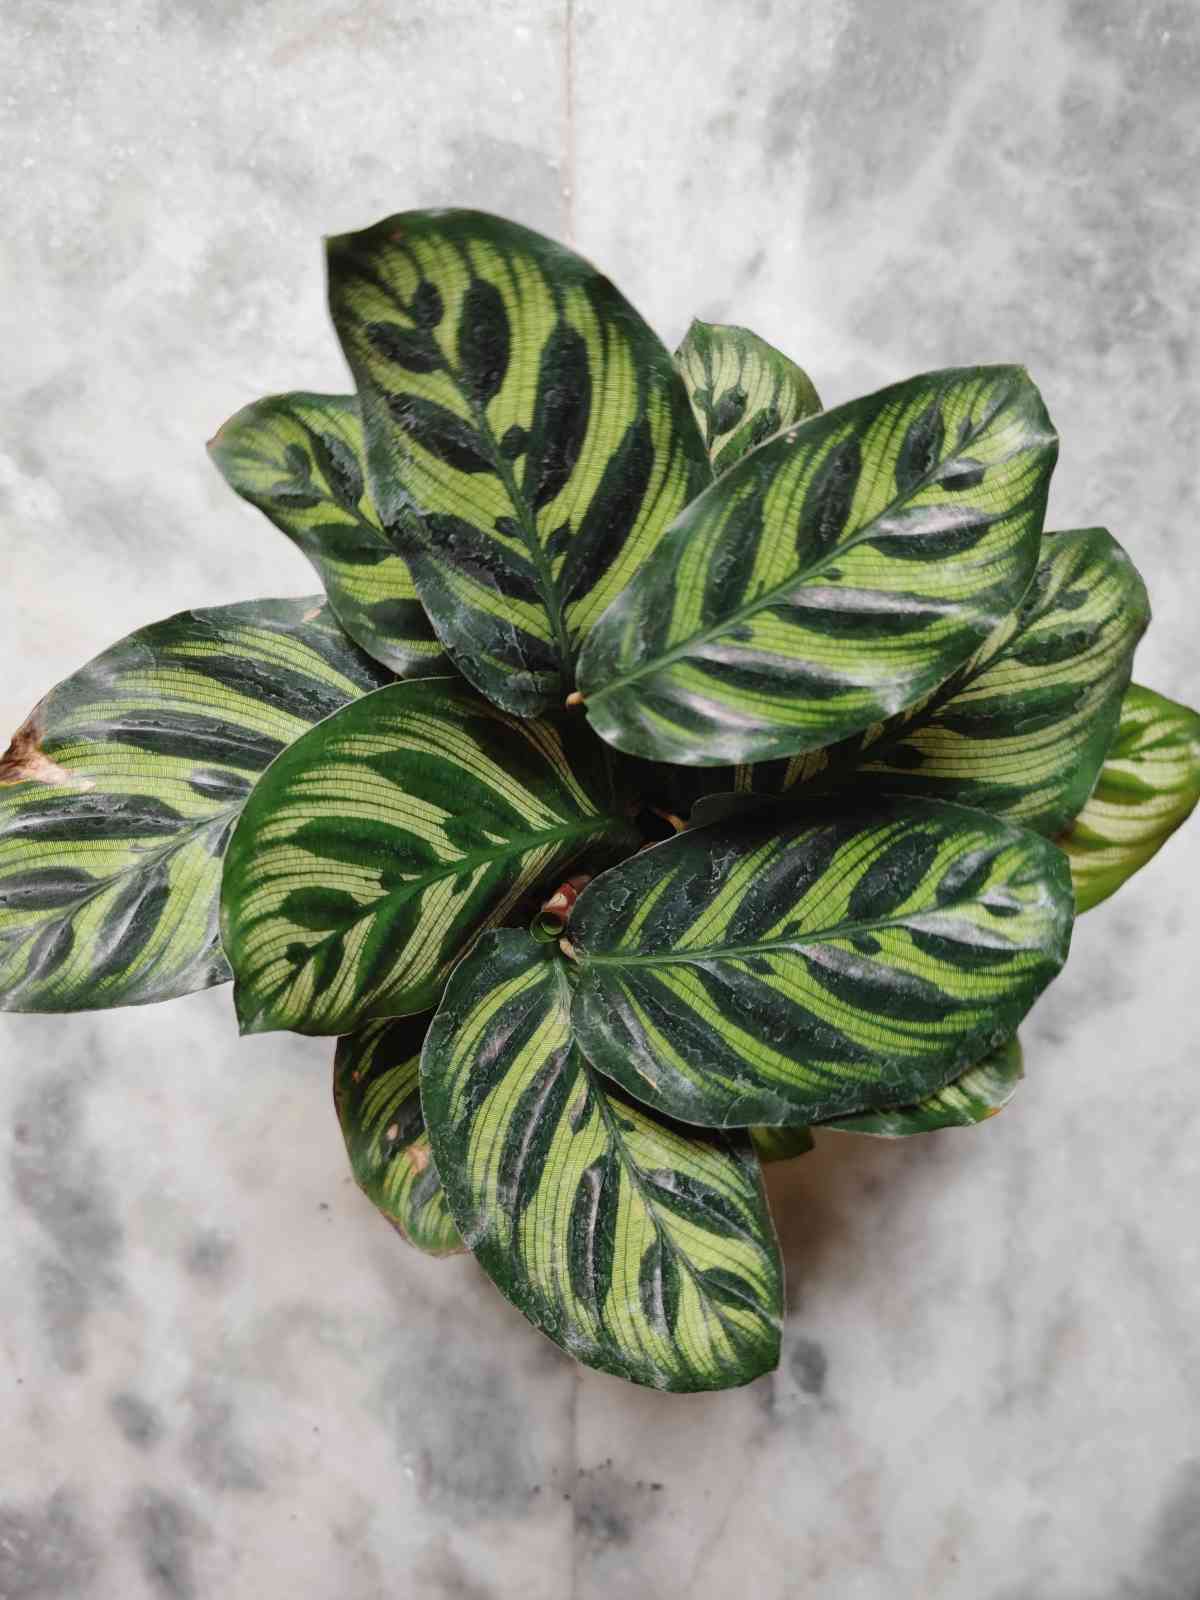 How to Grow and Care for Calathea Peacock Plant: A Guide